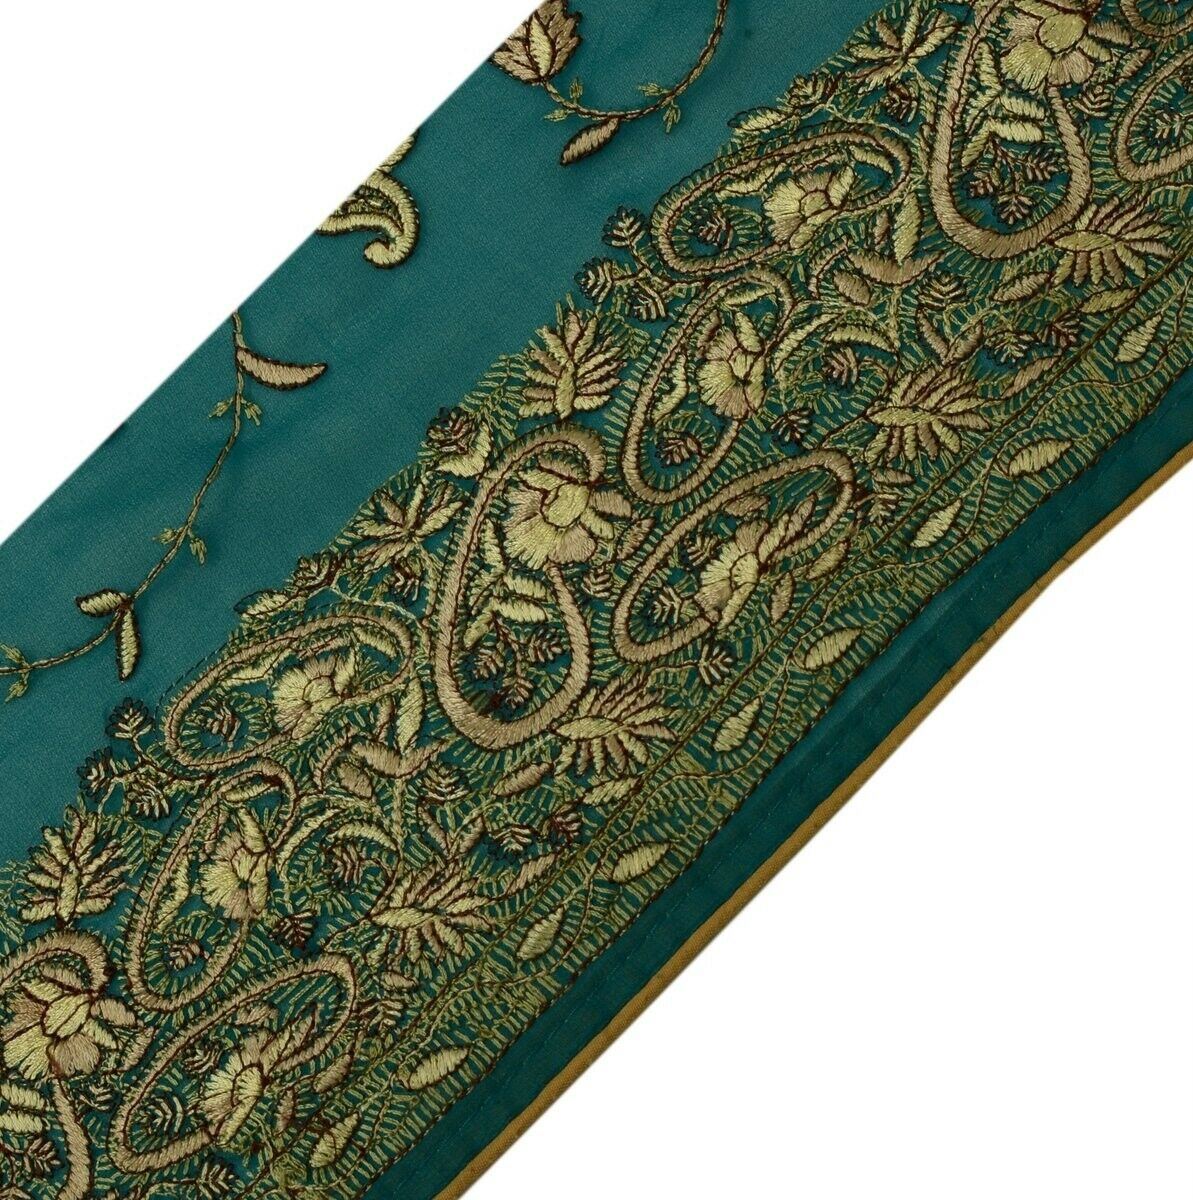 Vintage Saree Border Indian Craft Trim Paisley Embroidered Green Ribbon Lace